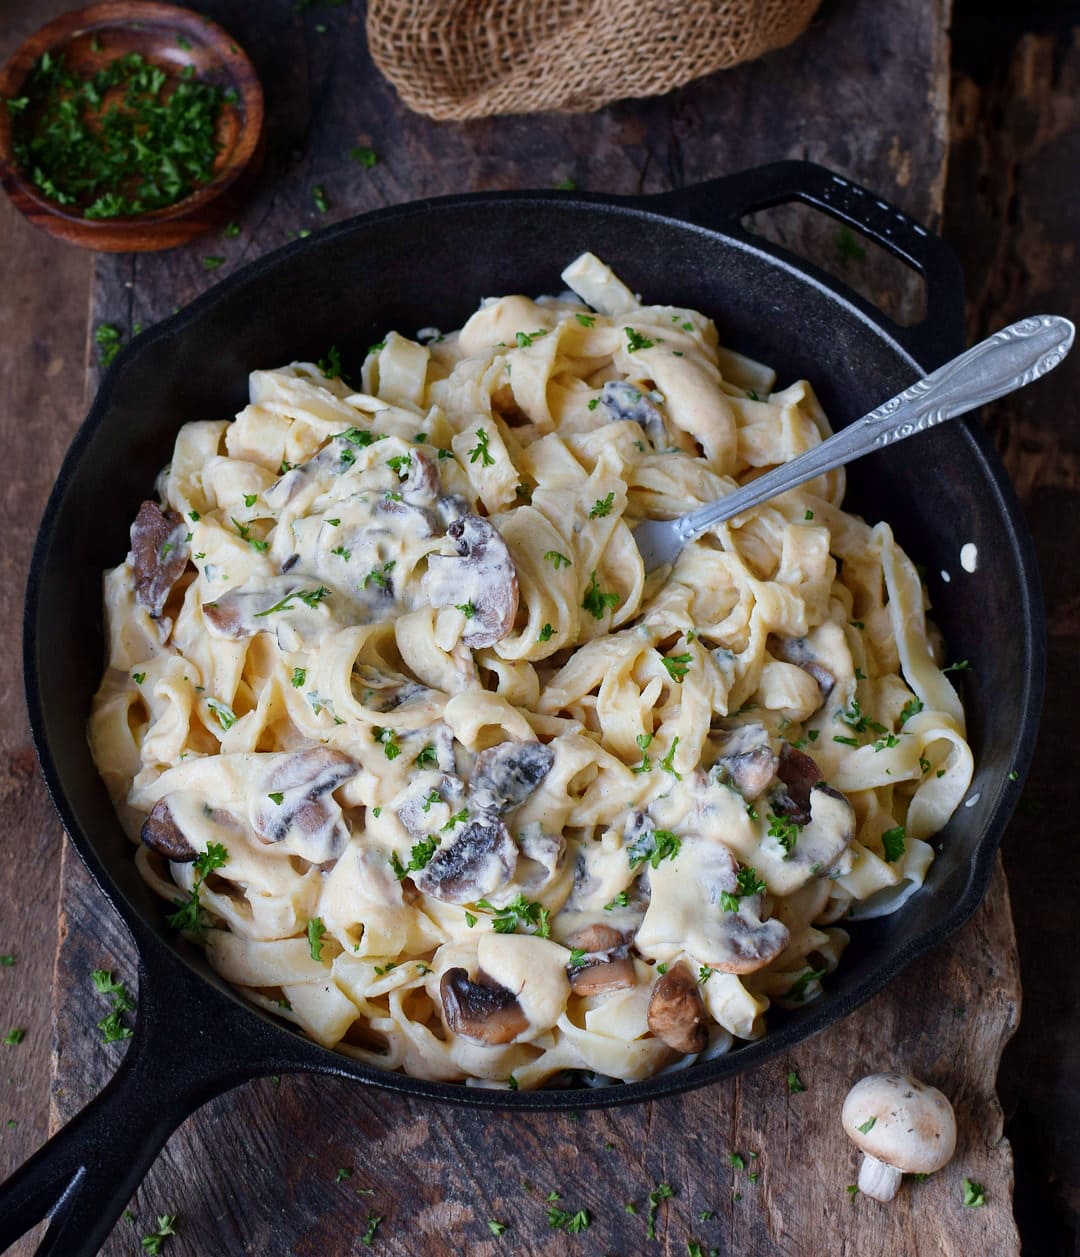 Fork submerged in vegan Alfredo sauce with mushrooms in a skillet